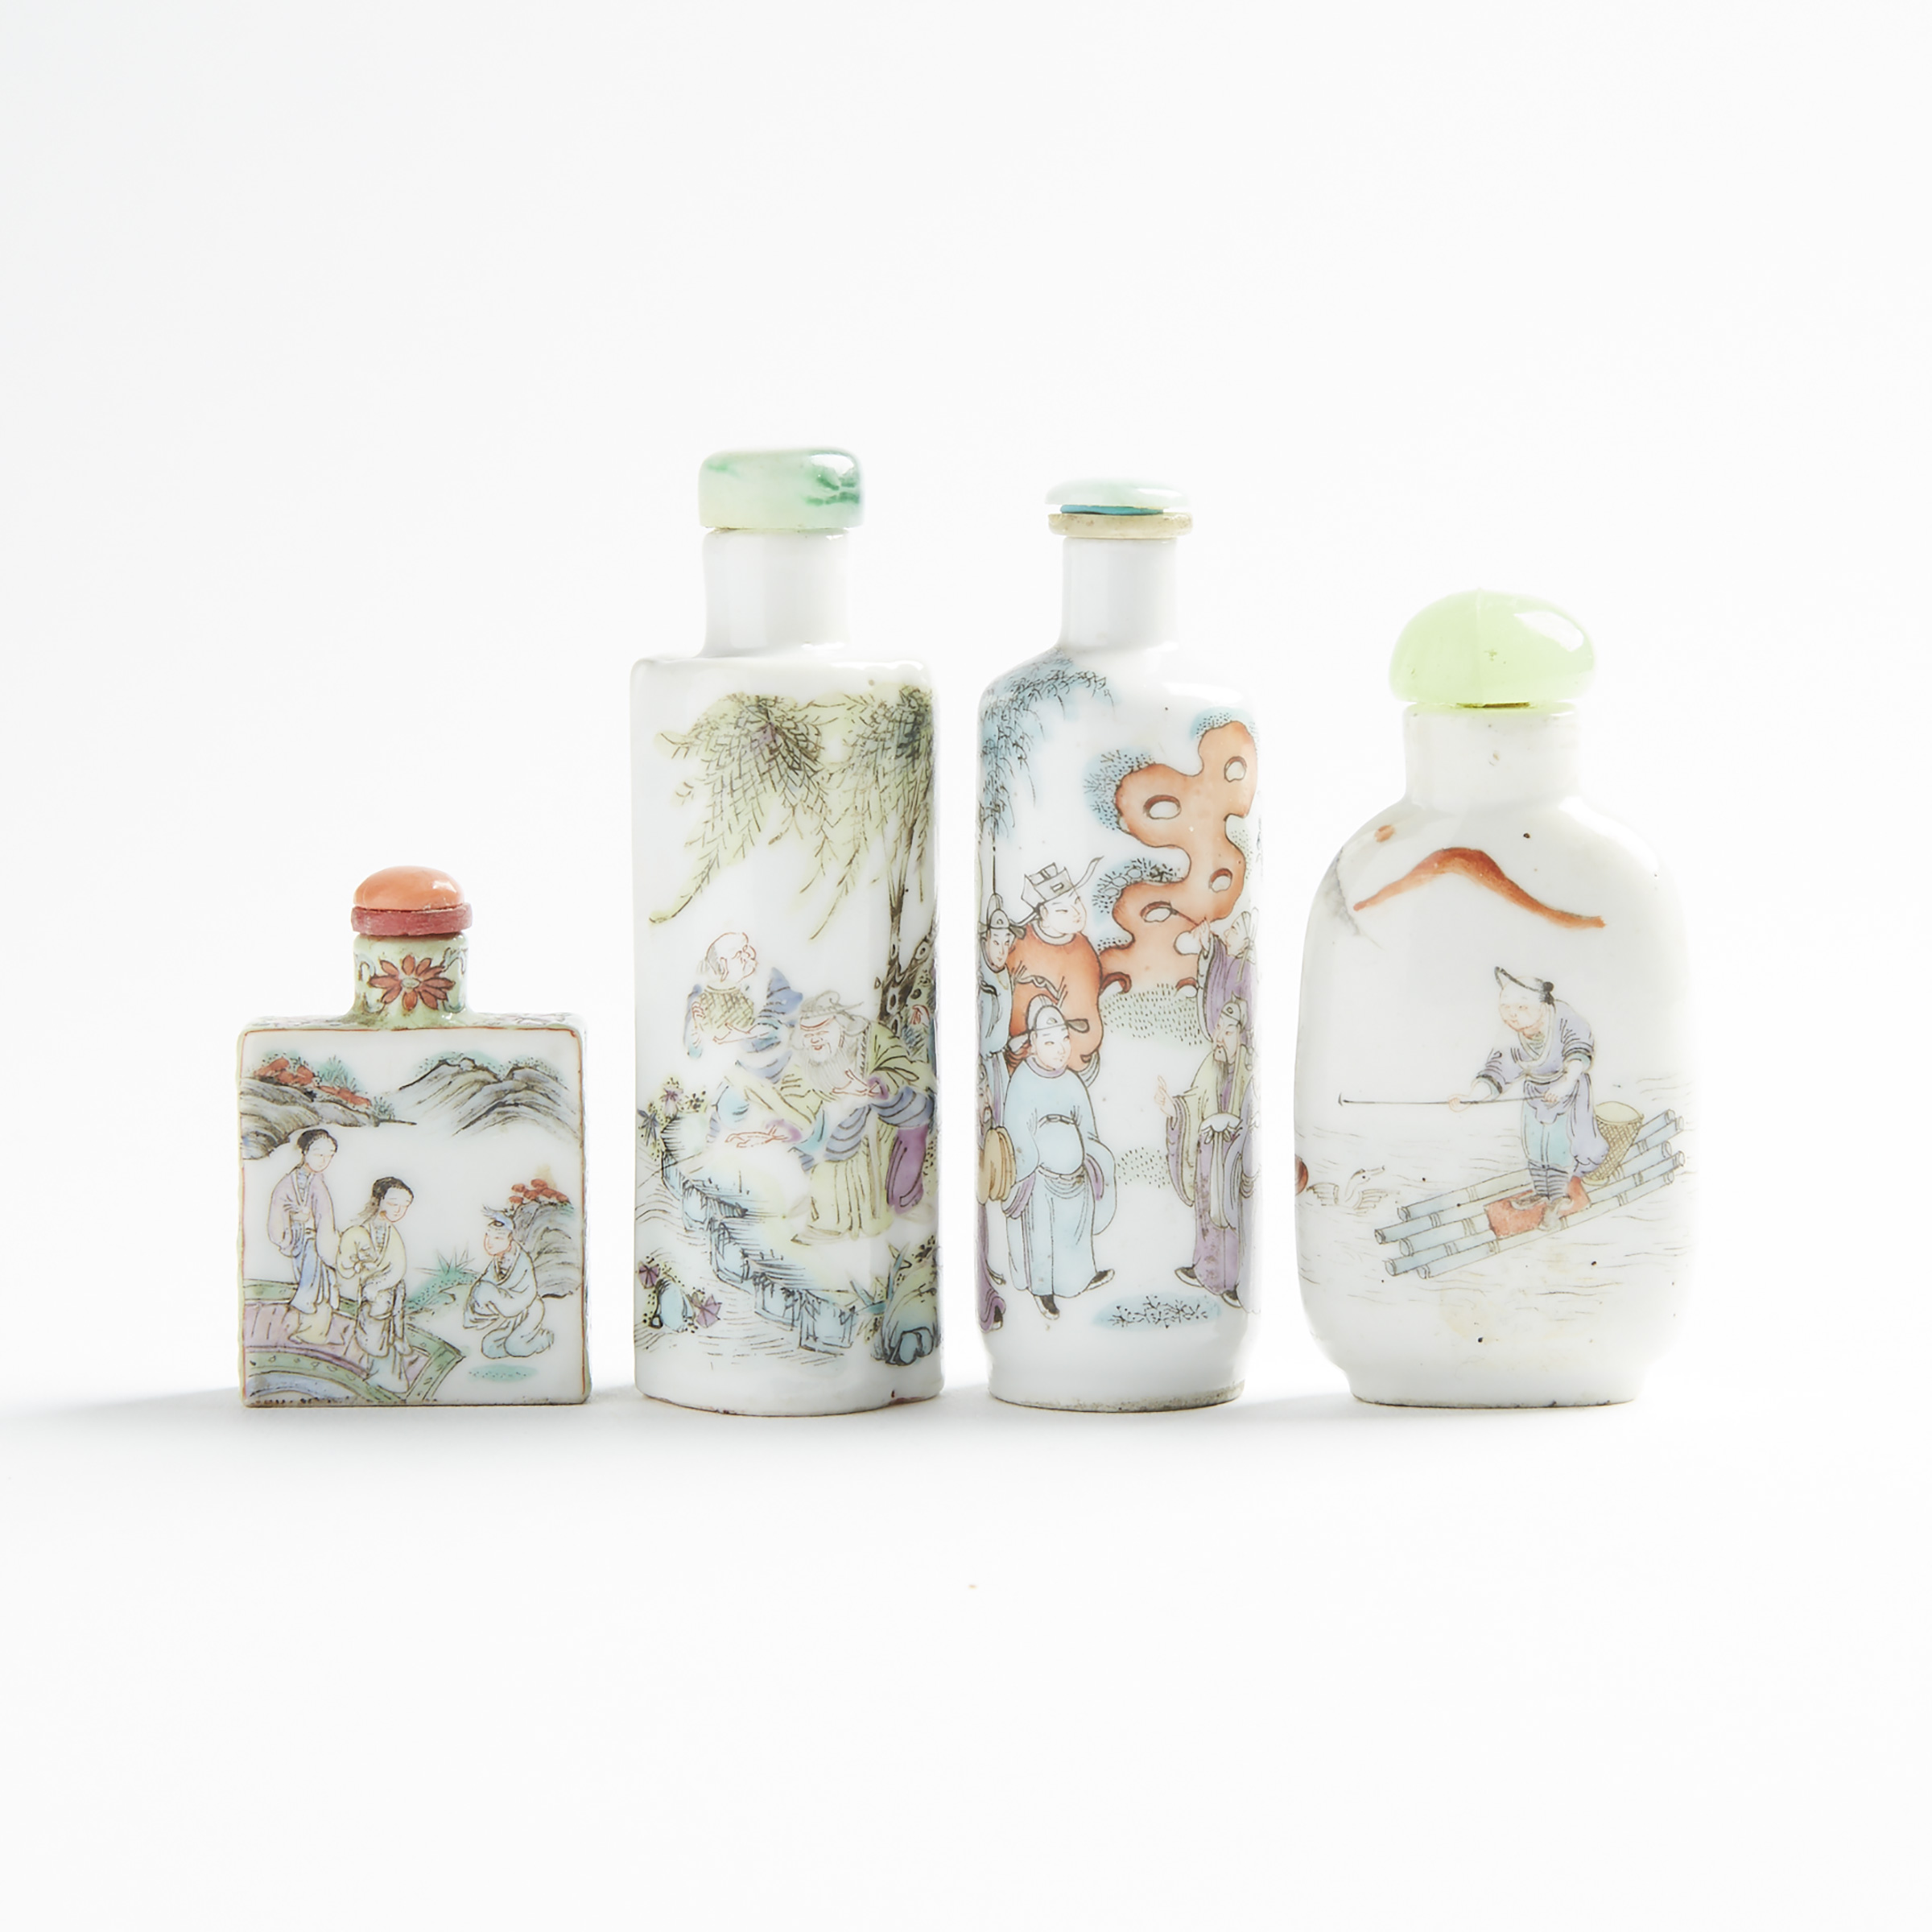 A Group of Four Famille Rose Porcelain Snuff Bottles, 19th Century